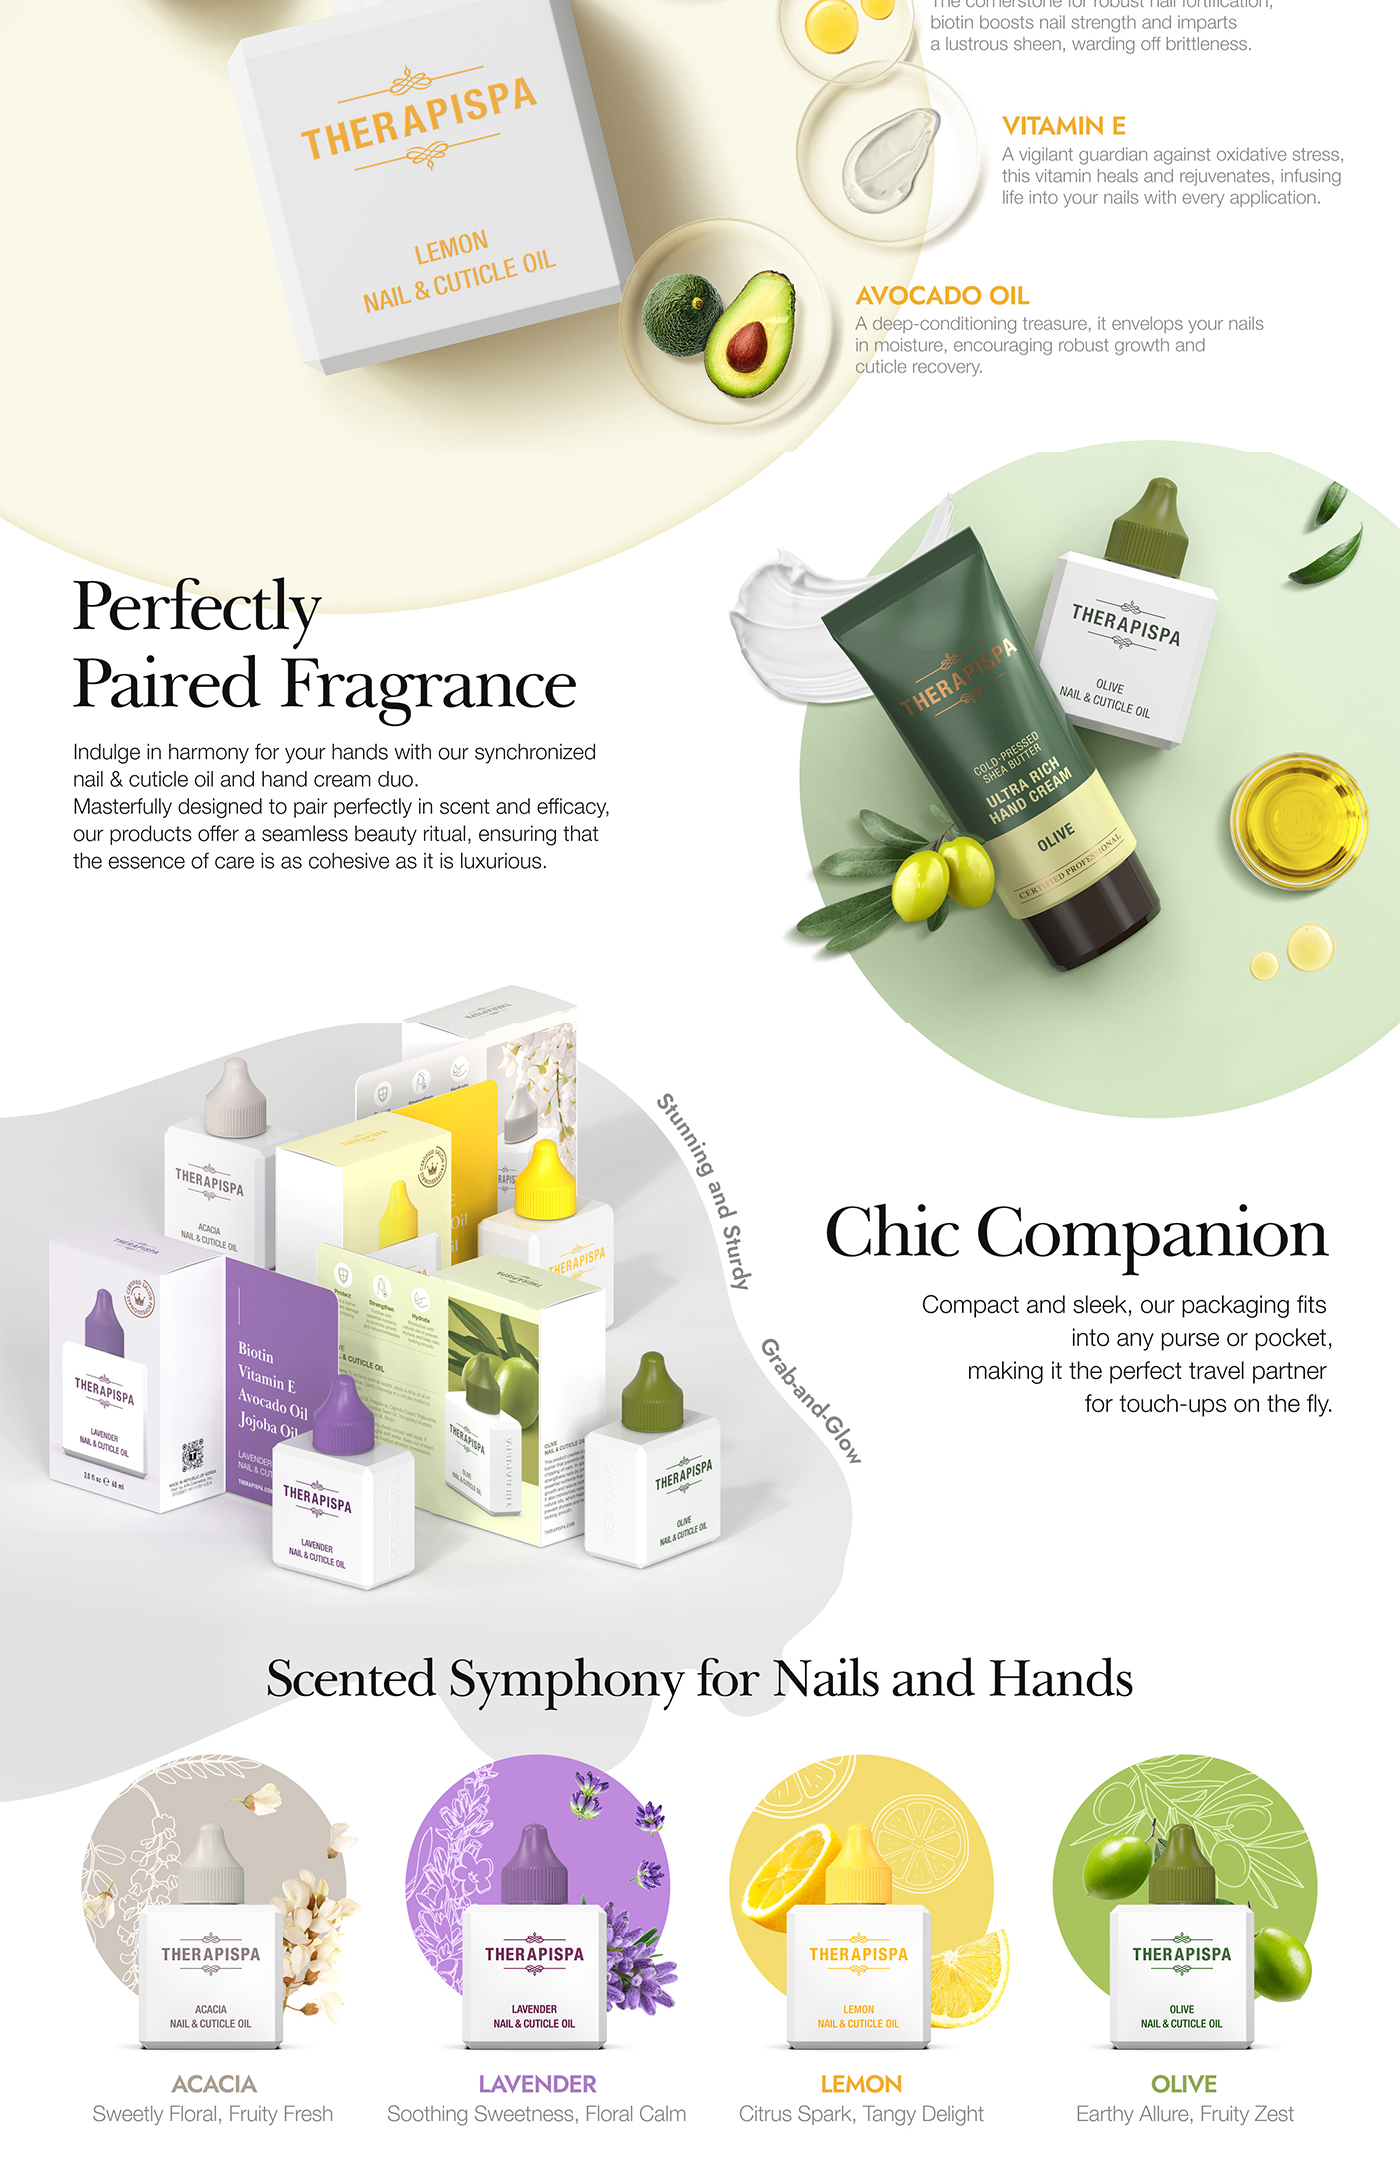 aiin cosmetics nail&cuticle oil 상세페이지, perfectly paired fragrance, chic companion